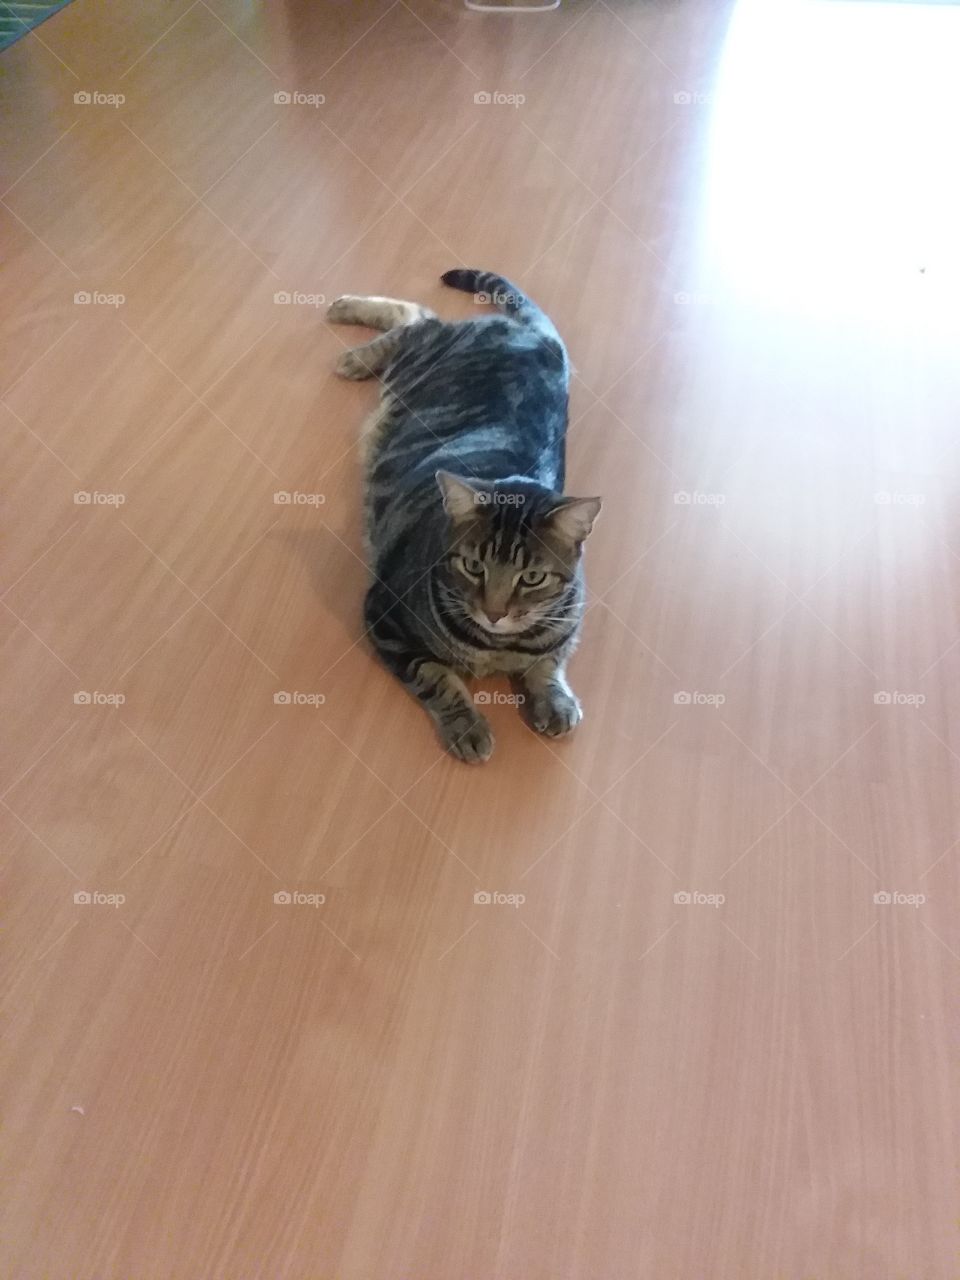 Tabby Cat Keeping Cool on the Shiny Laminate